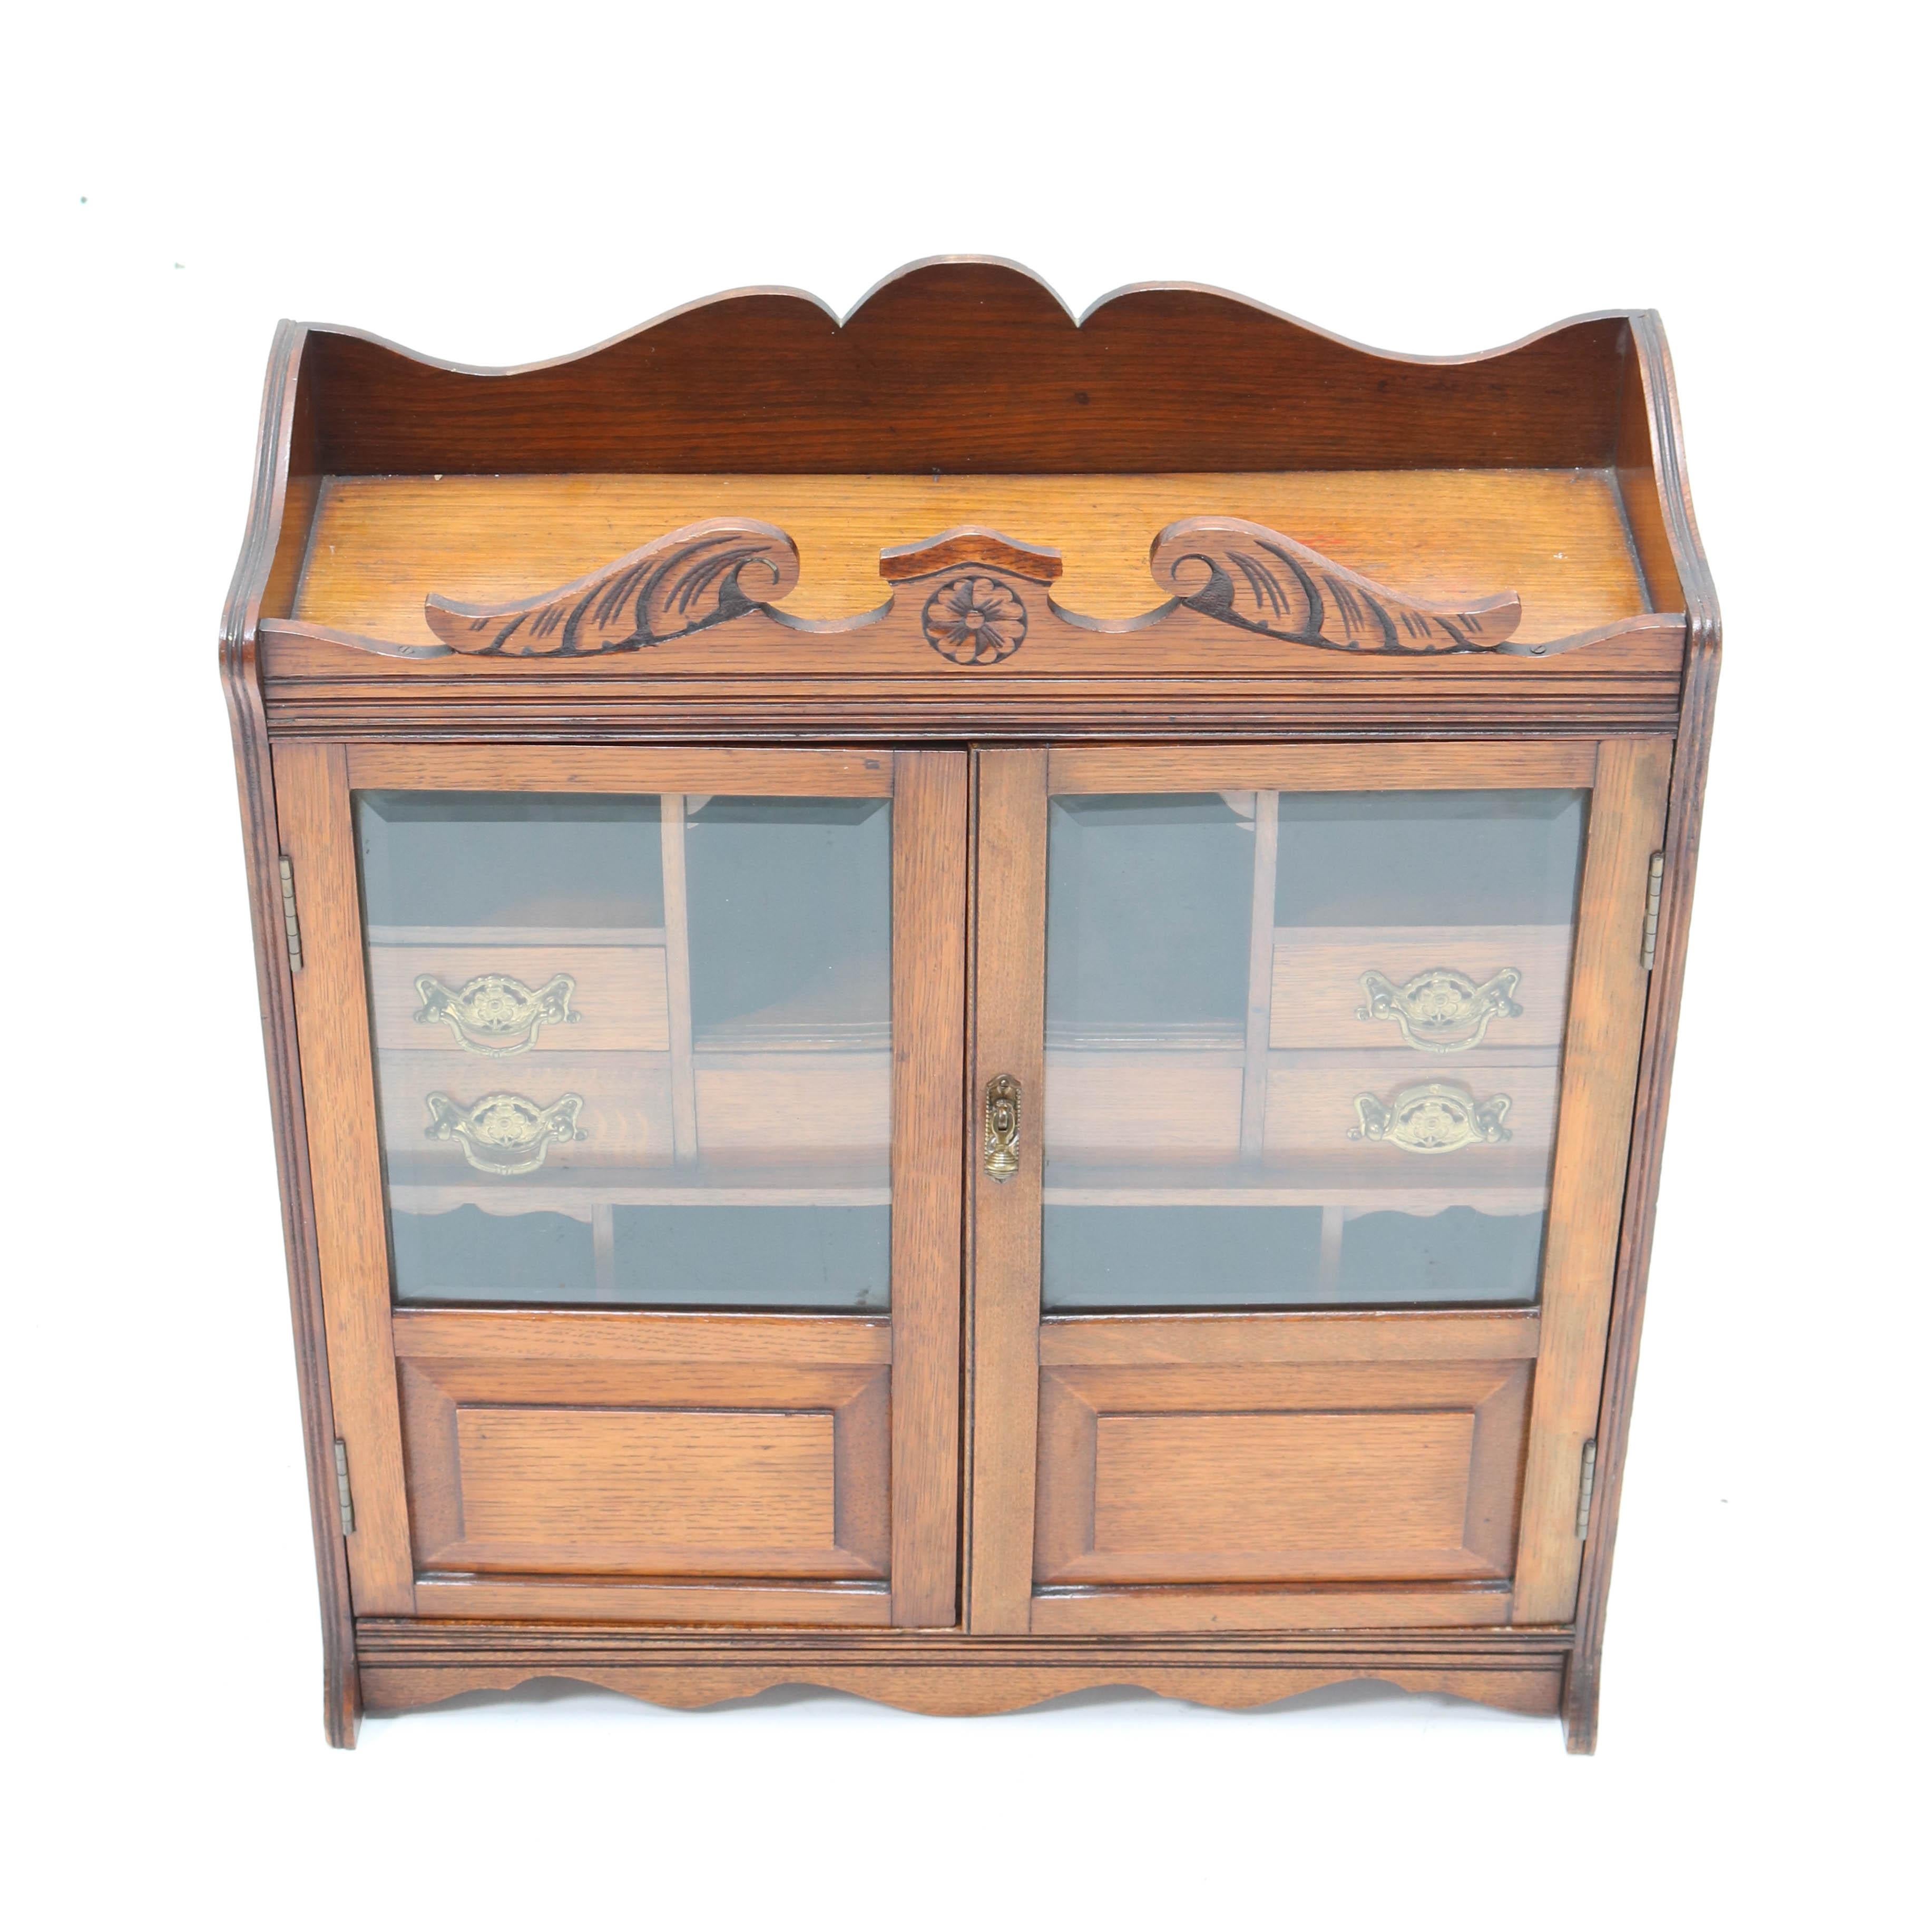 Wonderful and rare Aesthetic Movement wall cabinet.
Striking English design from the late 19th century.
Solid walnut with original beveled glass in the doors.
Original solid brass handles on the seven drawers inside.
In very good original